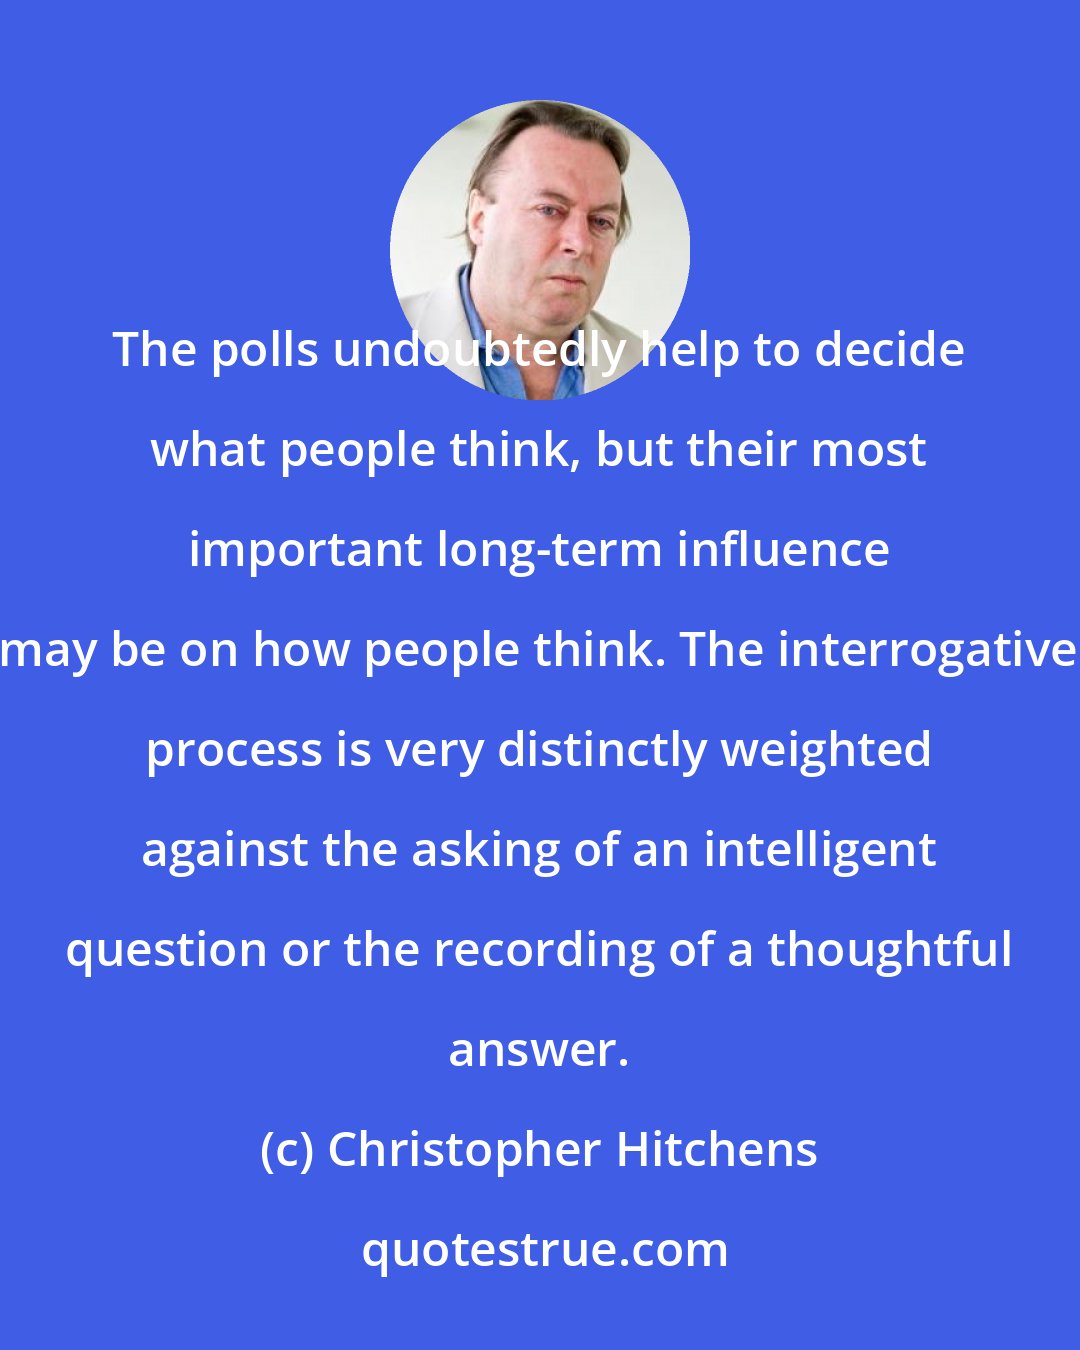 Christopher Hitchens: The polls undoubtedly help to decide what people think, but their most important long-term influence may be on how people think. The interrogative process is very distinctly weighted against the asking of an intelligent question or the recording of a thoughtful answer.